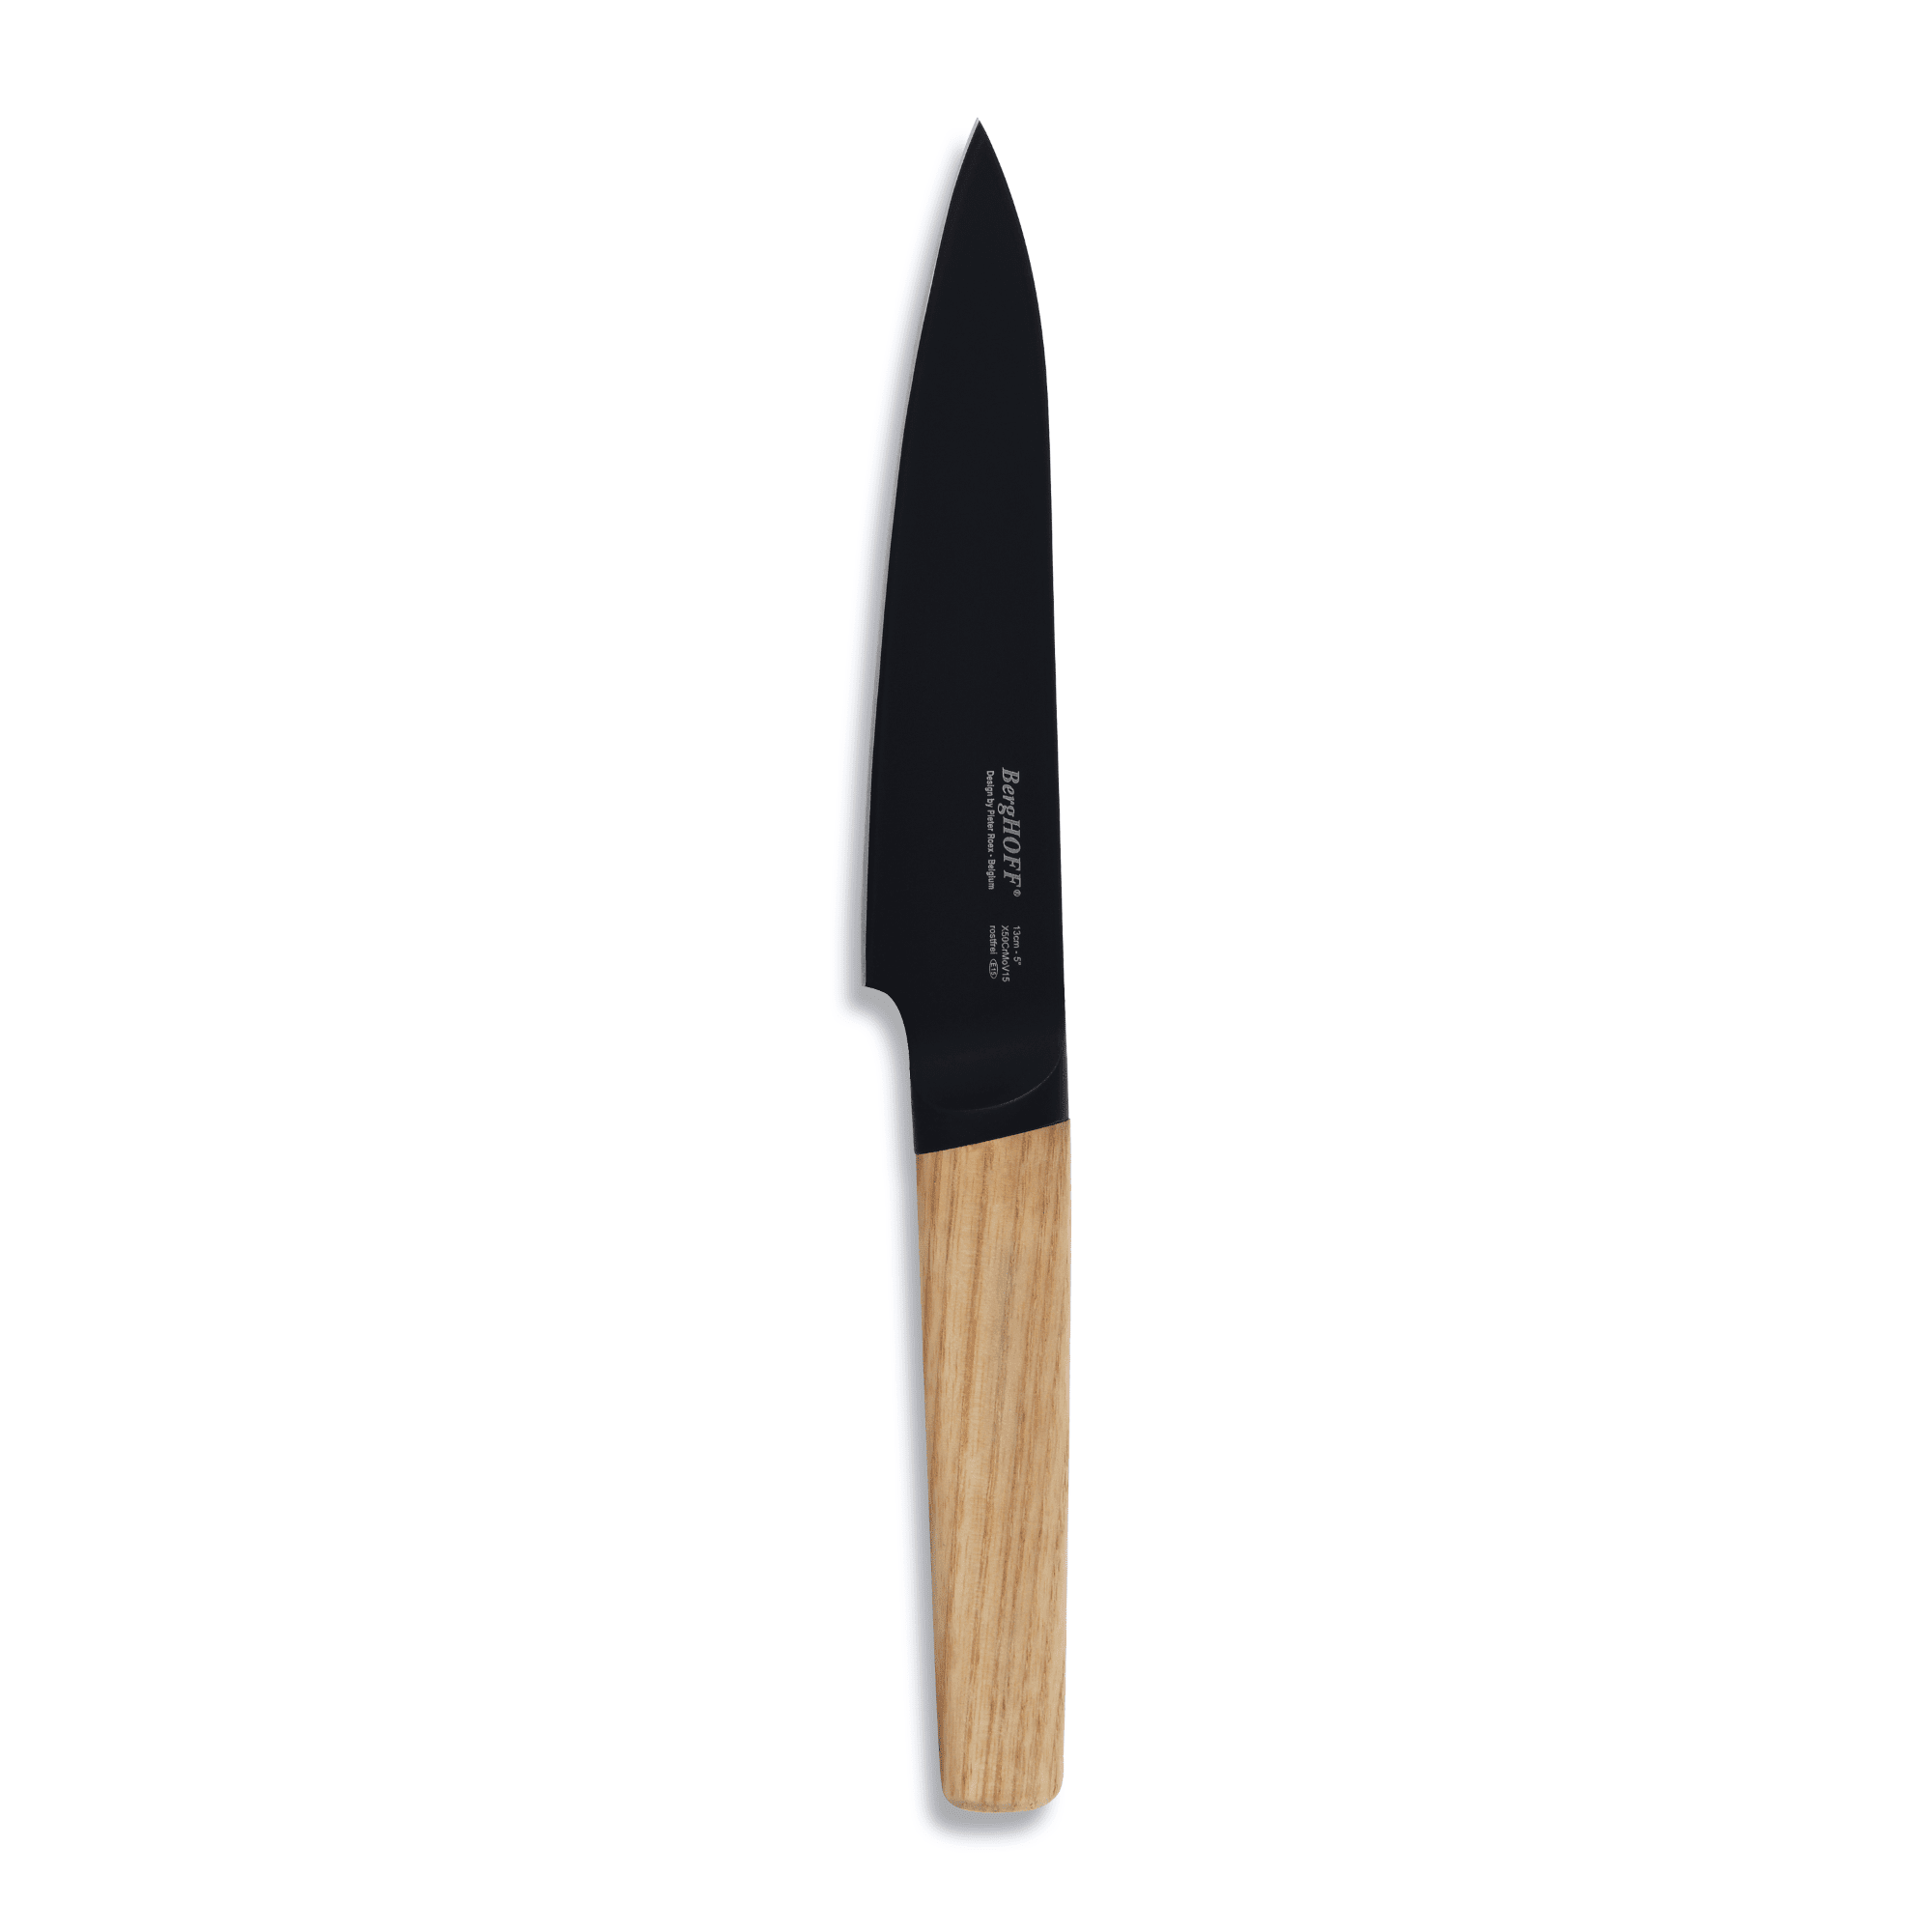 BergHOFF - Ron Utility Knife with Wooden Handle  - Stainless Steel - 25.5cm - 66000106